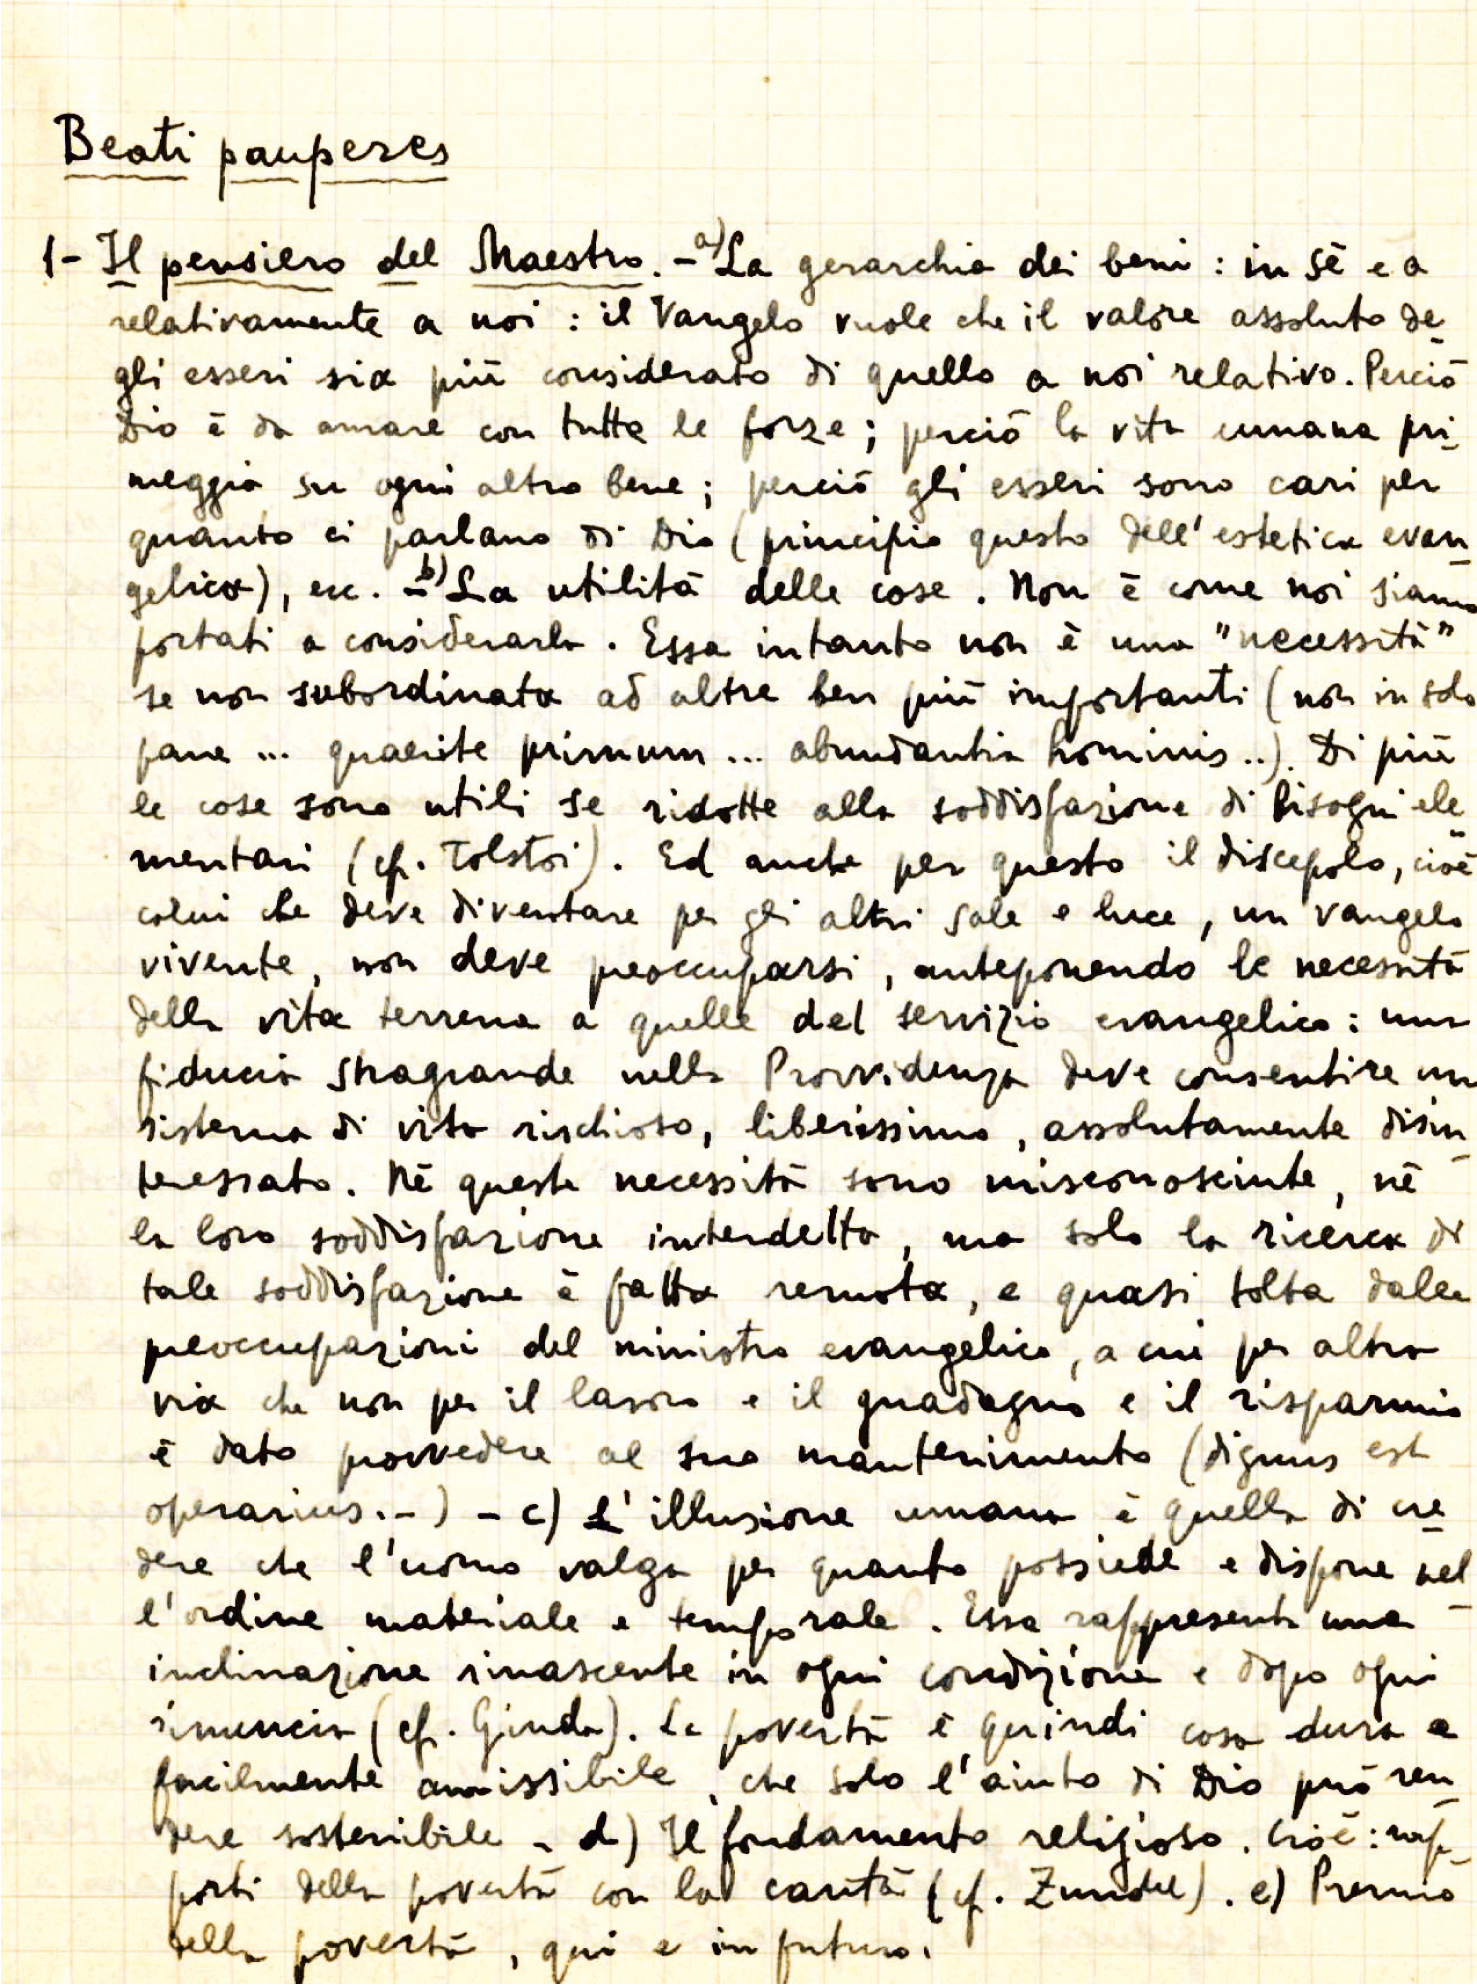 An autographed page written by Montini in connection with the San Vincenzo conferences.